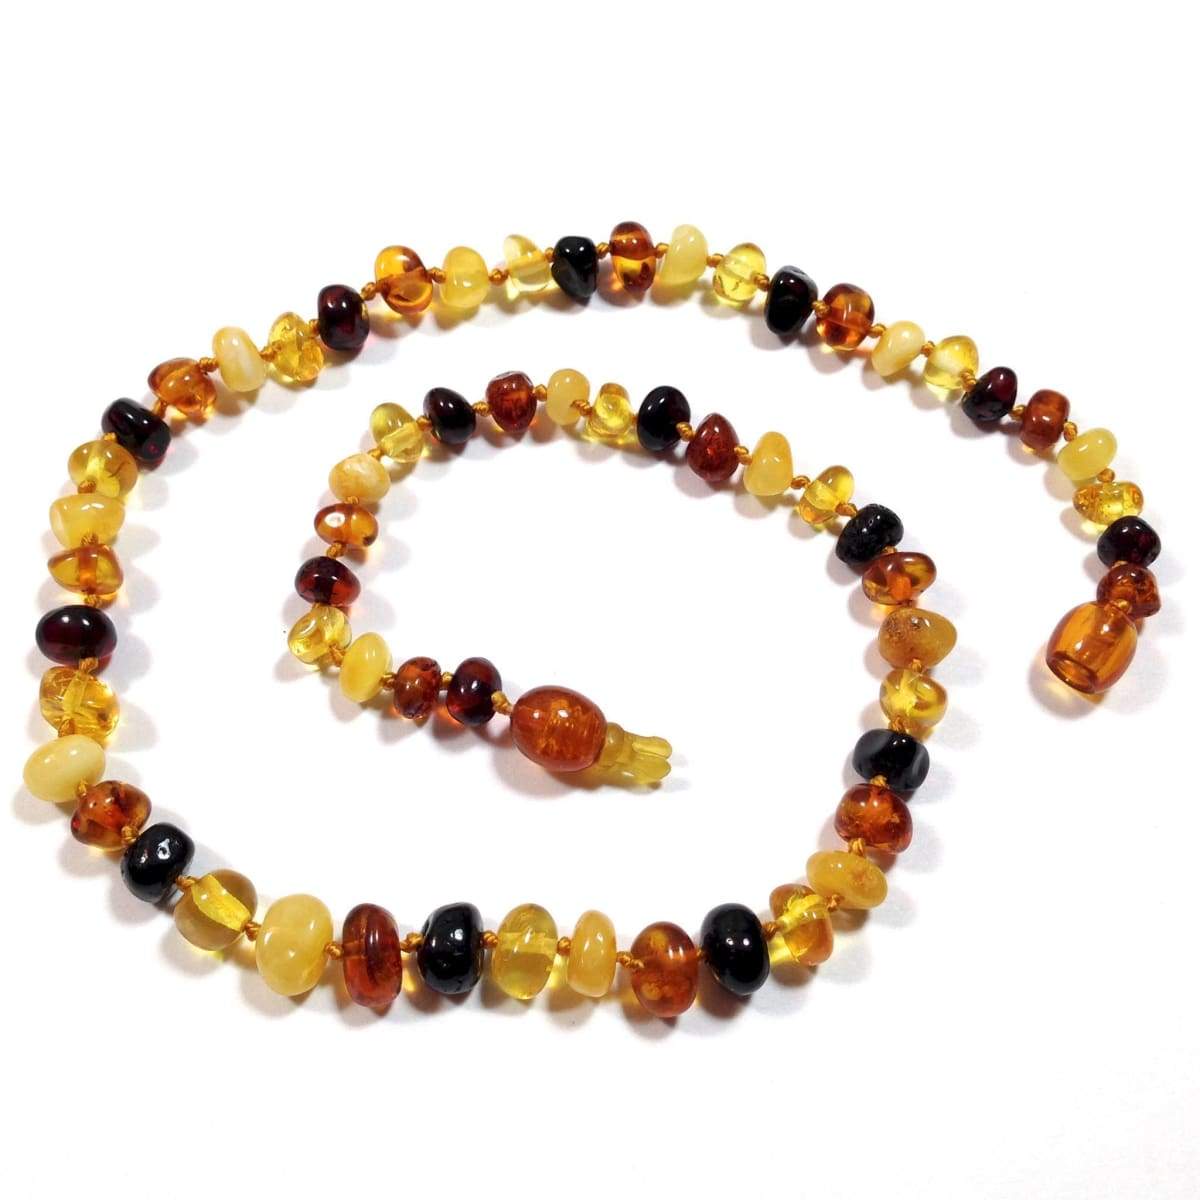 Antique Genuine Natural Baltic Cognac Large Amber Beads Necklace 86 g 27